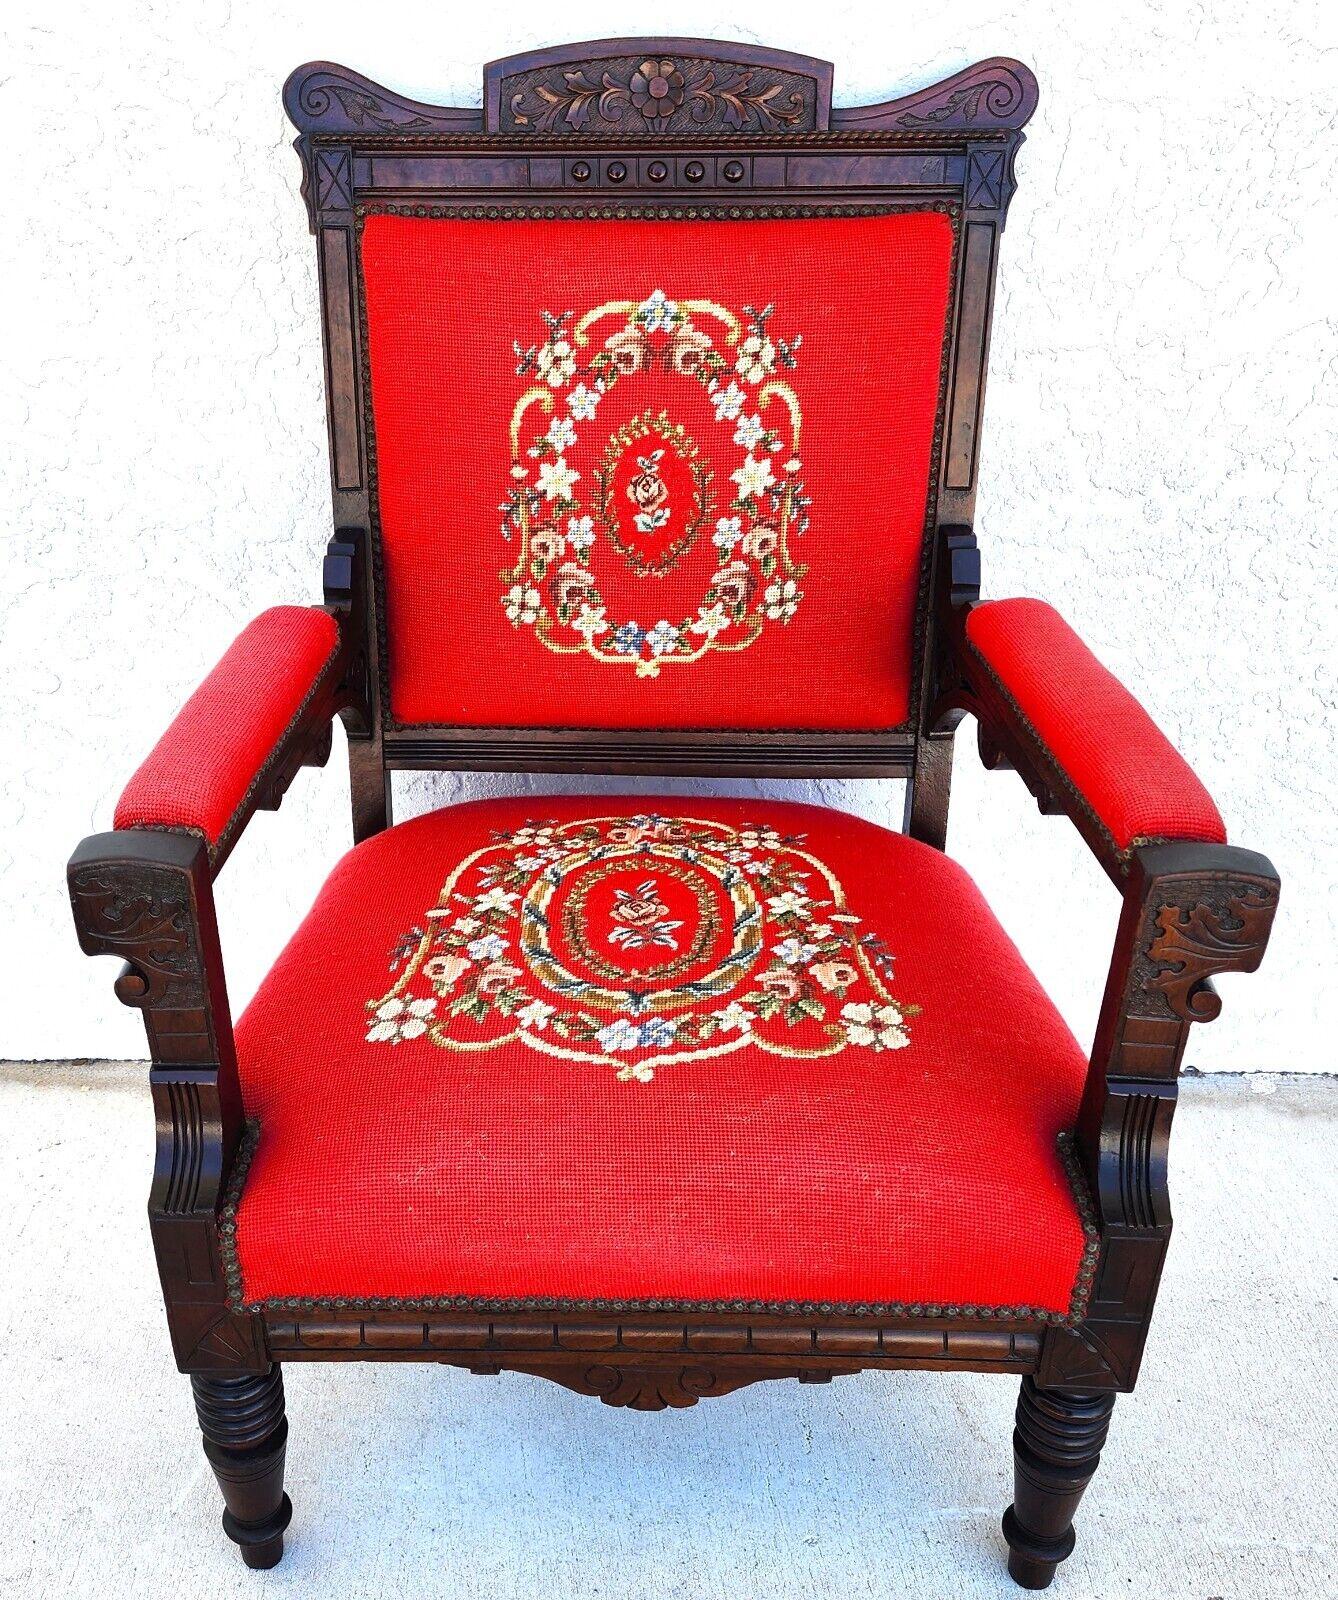 For FULL item description click on CONTINUE READING at the bottom of this page.

Offering One Of Our Recent Palm Beach Estate Fine Furniture Acquisitions Of An 
Antique 1800s Mahogany Armchair Victorian Empire Style with Detailed Carvings and